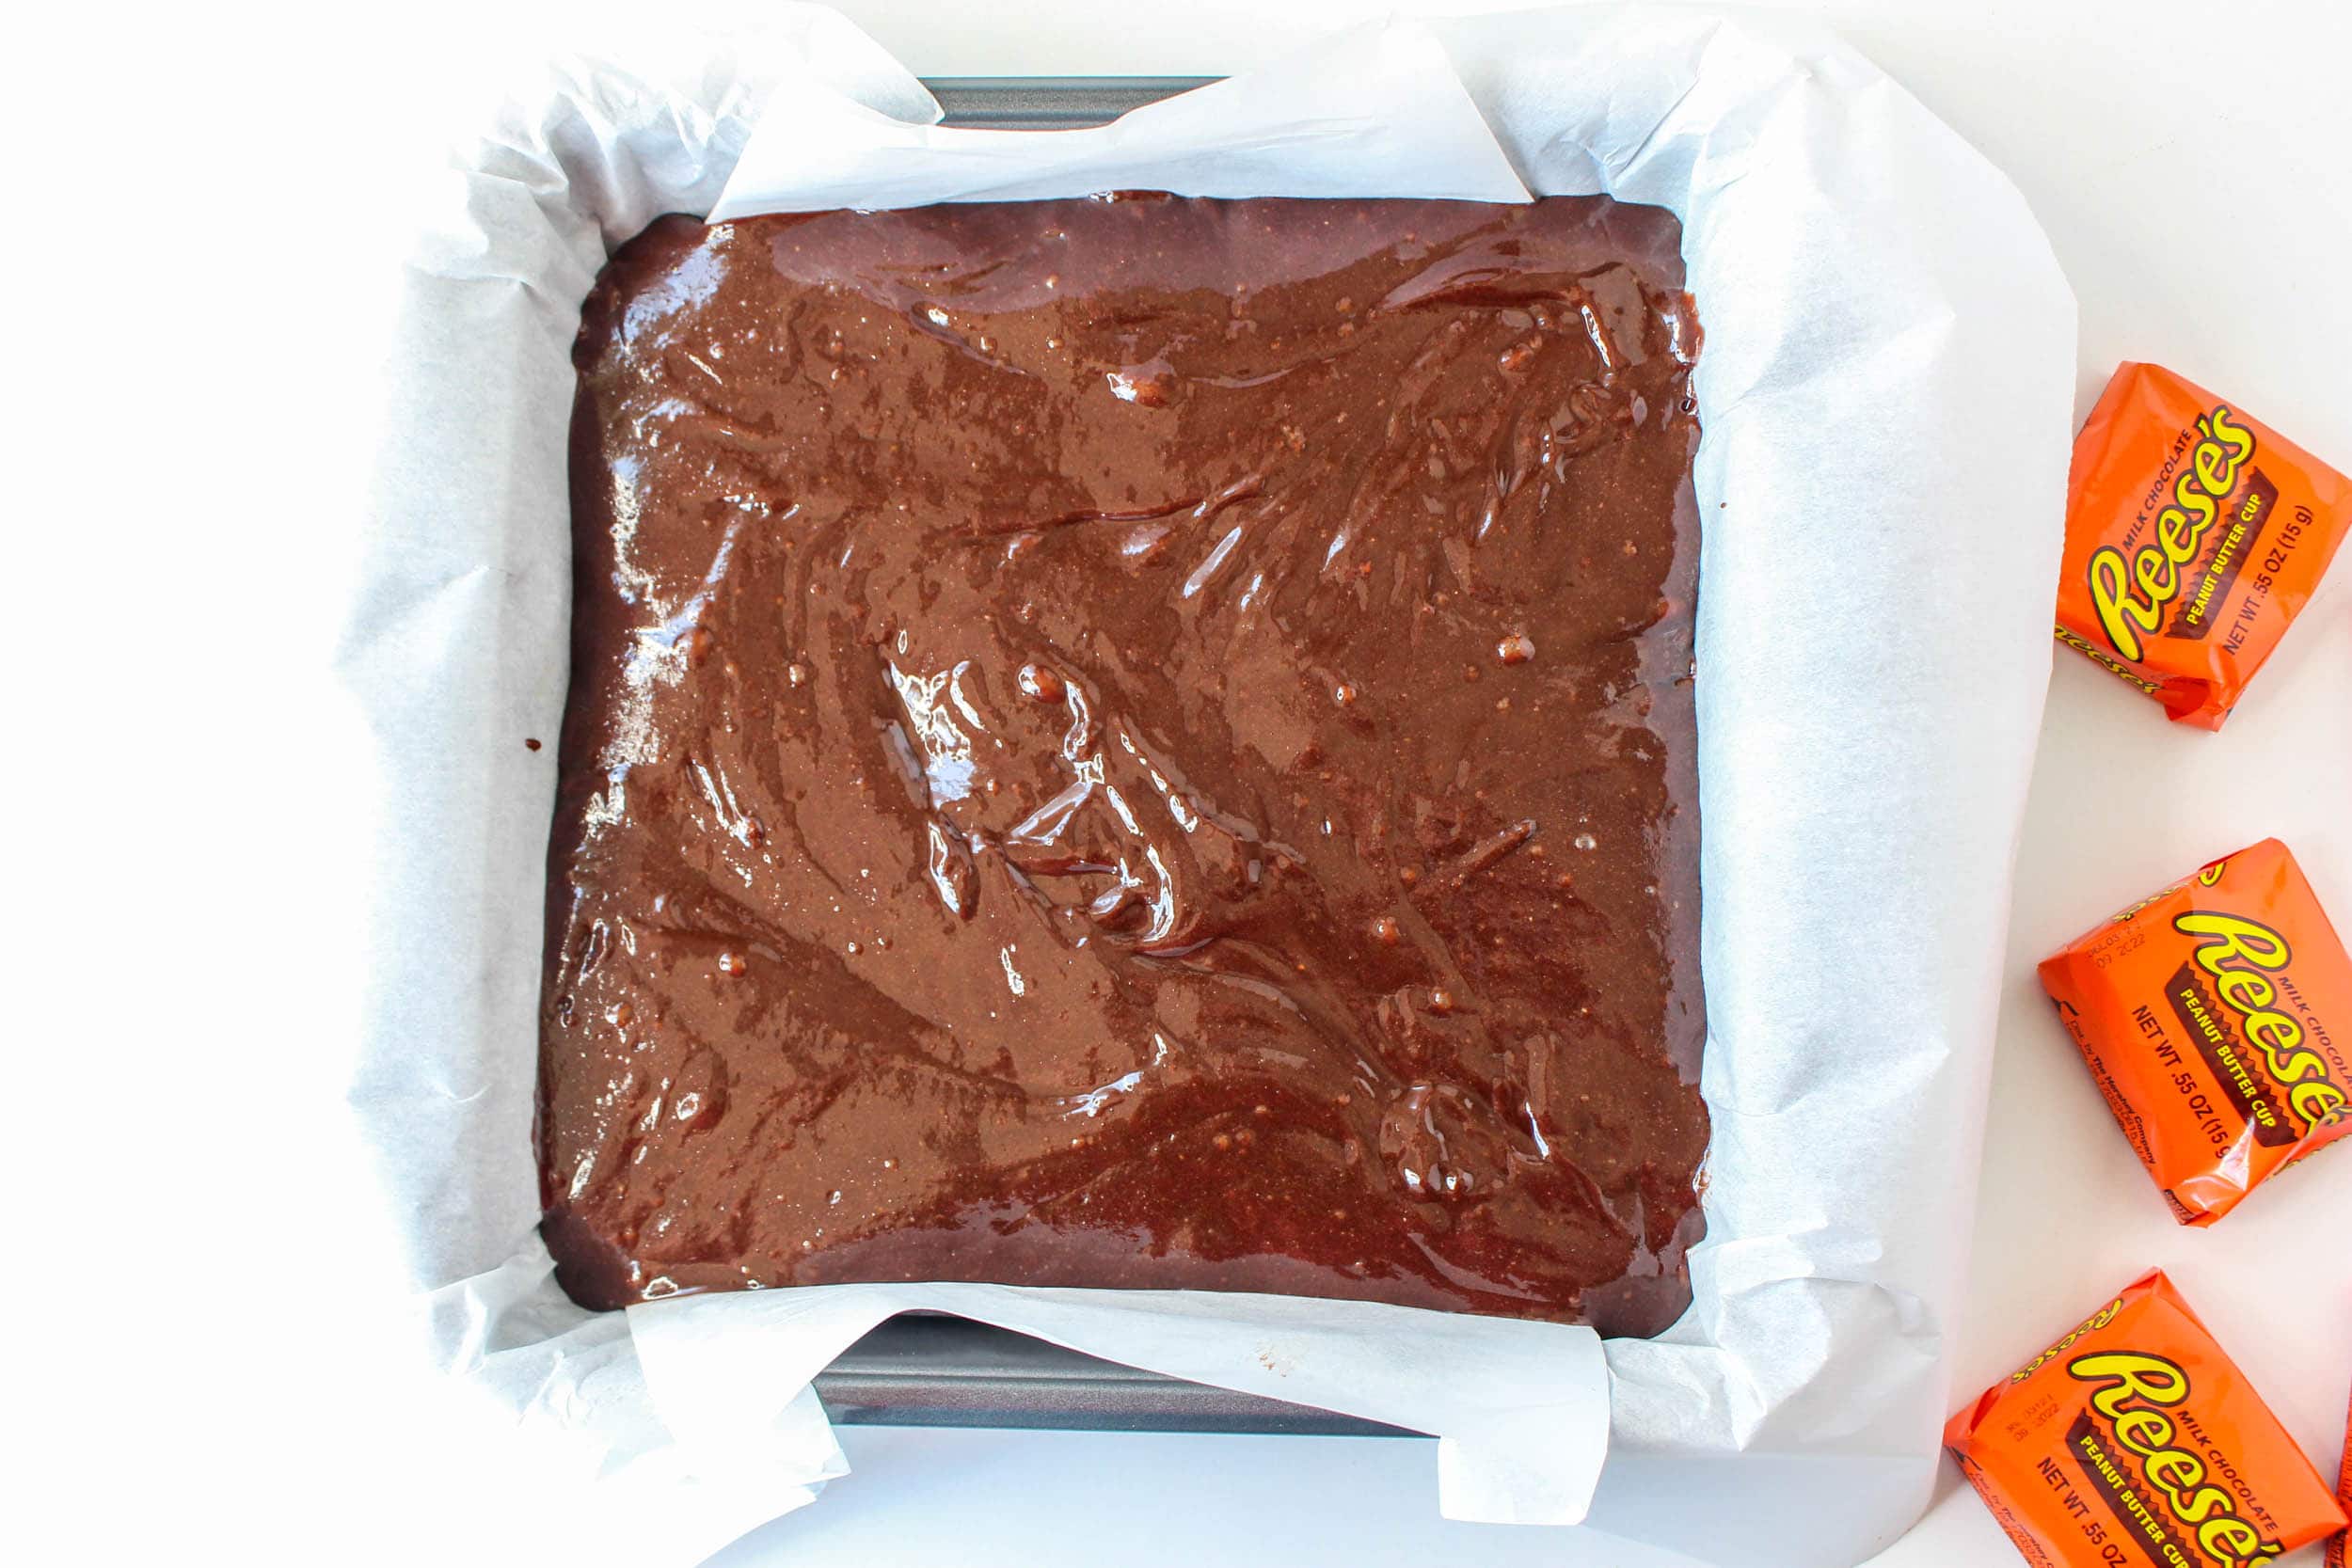 The brownie mix in the pan.